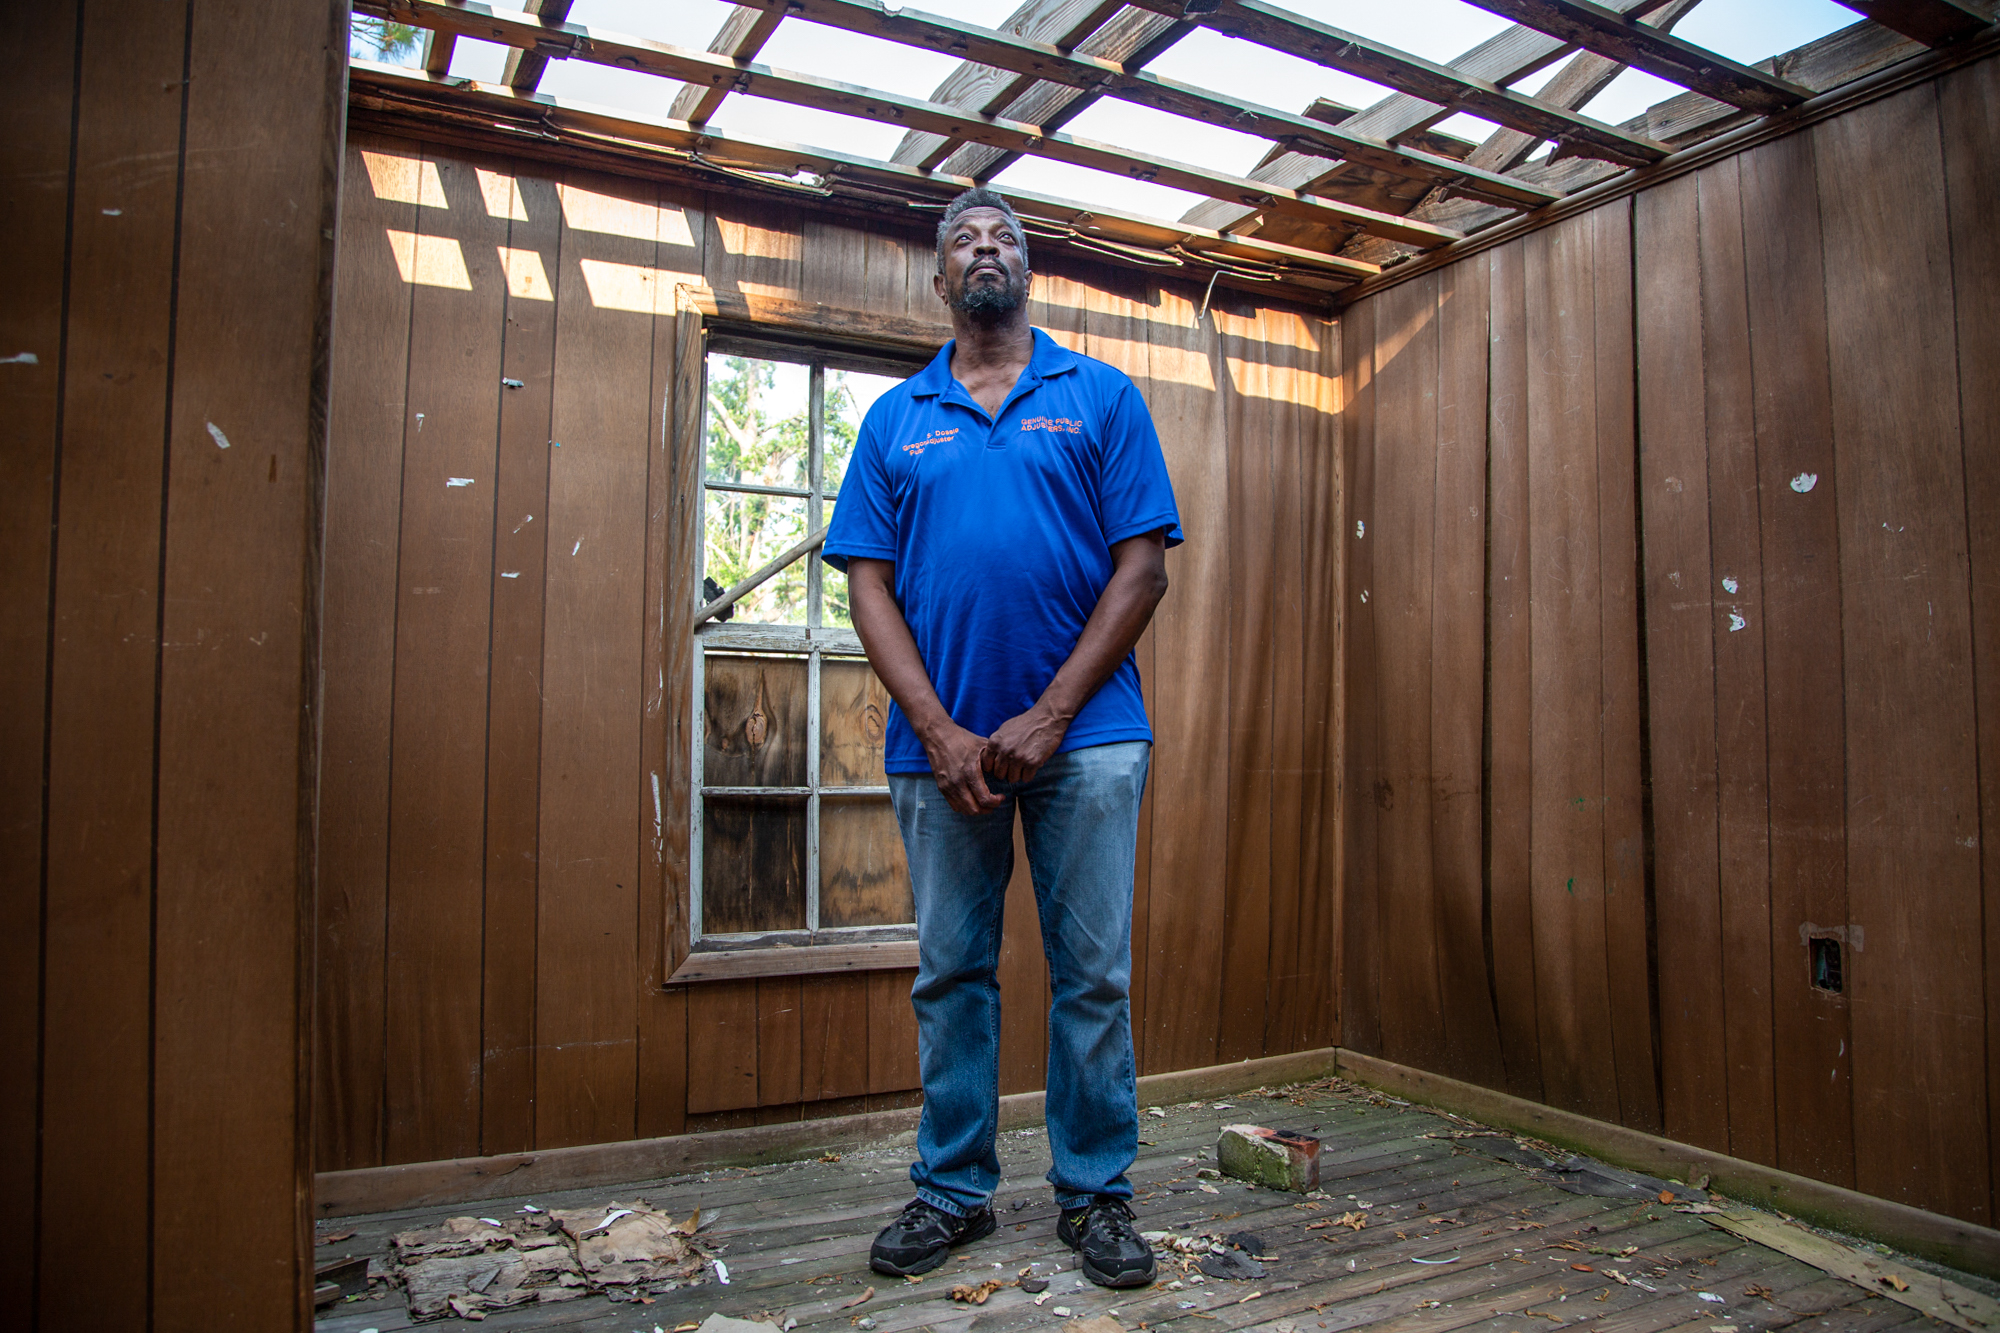 Greg Dossie - Greg Dossie of Panama City, Florida, lives next door to his childhood home, which was torn apart by Hurricane Michael. “People are thinking we're going be back to normal in two, three, four, five years,”  Dossie said. “It's not going to happen.” (Jake Goodrick/News21)